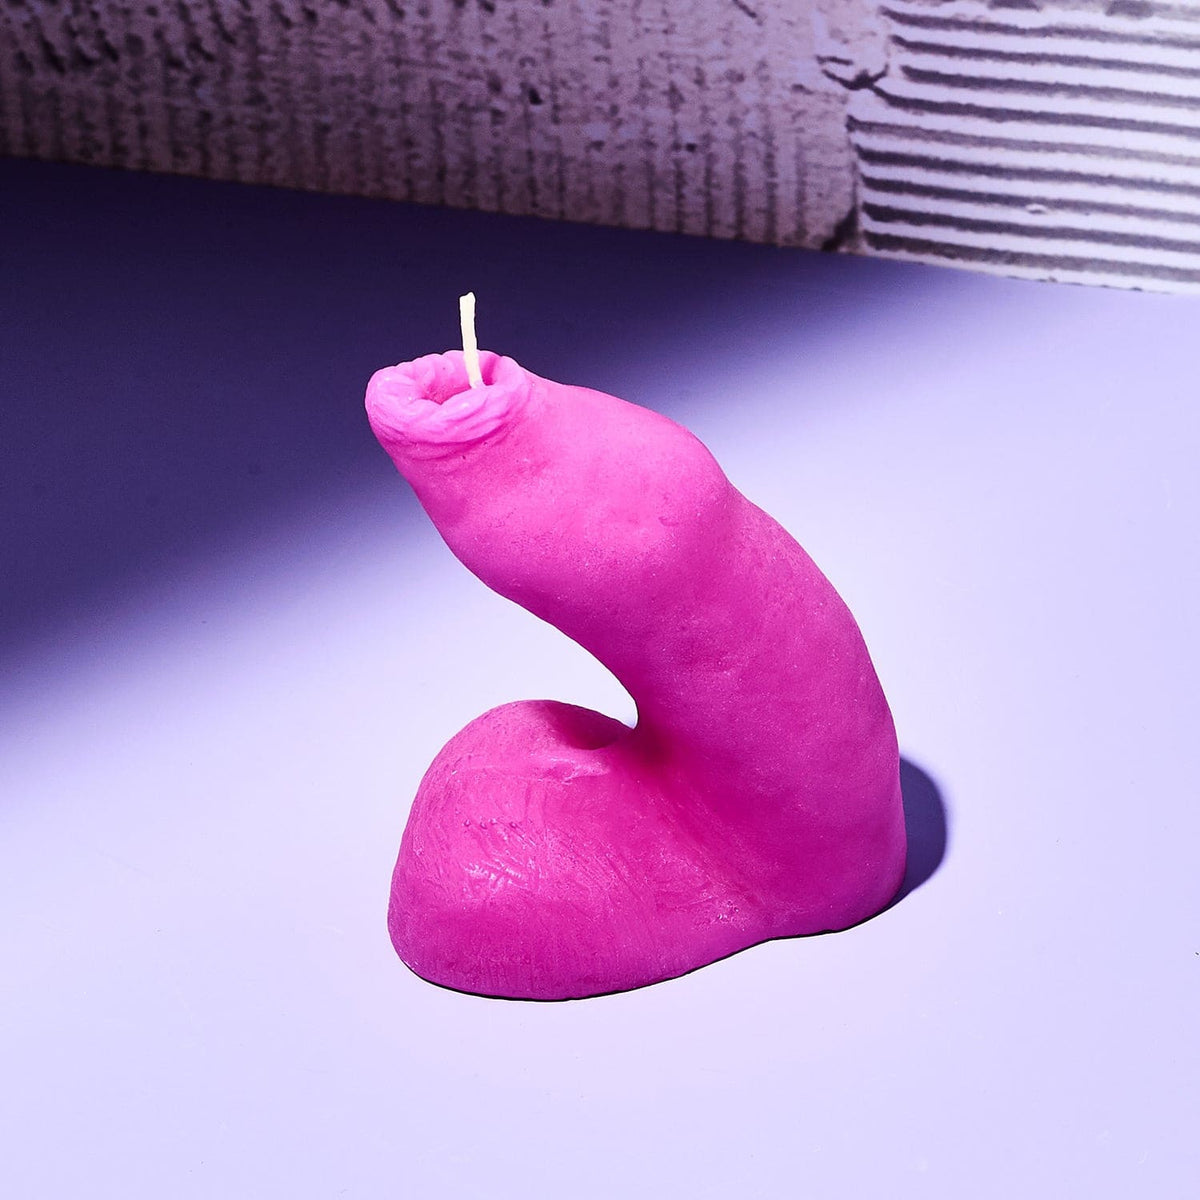 Flaccid Phallus Candle - Pink Boyfriend Gifts - Candle -